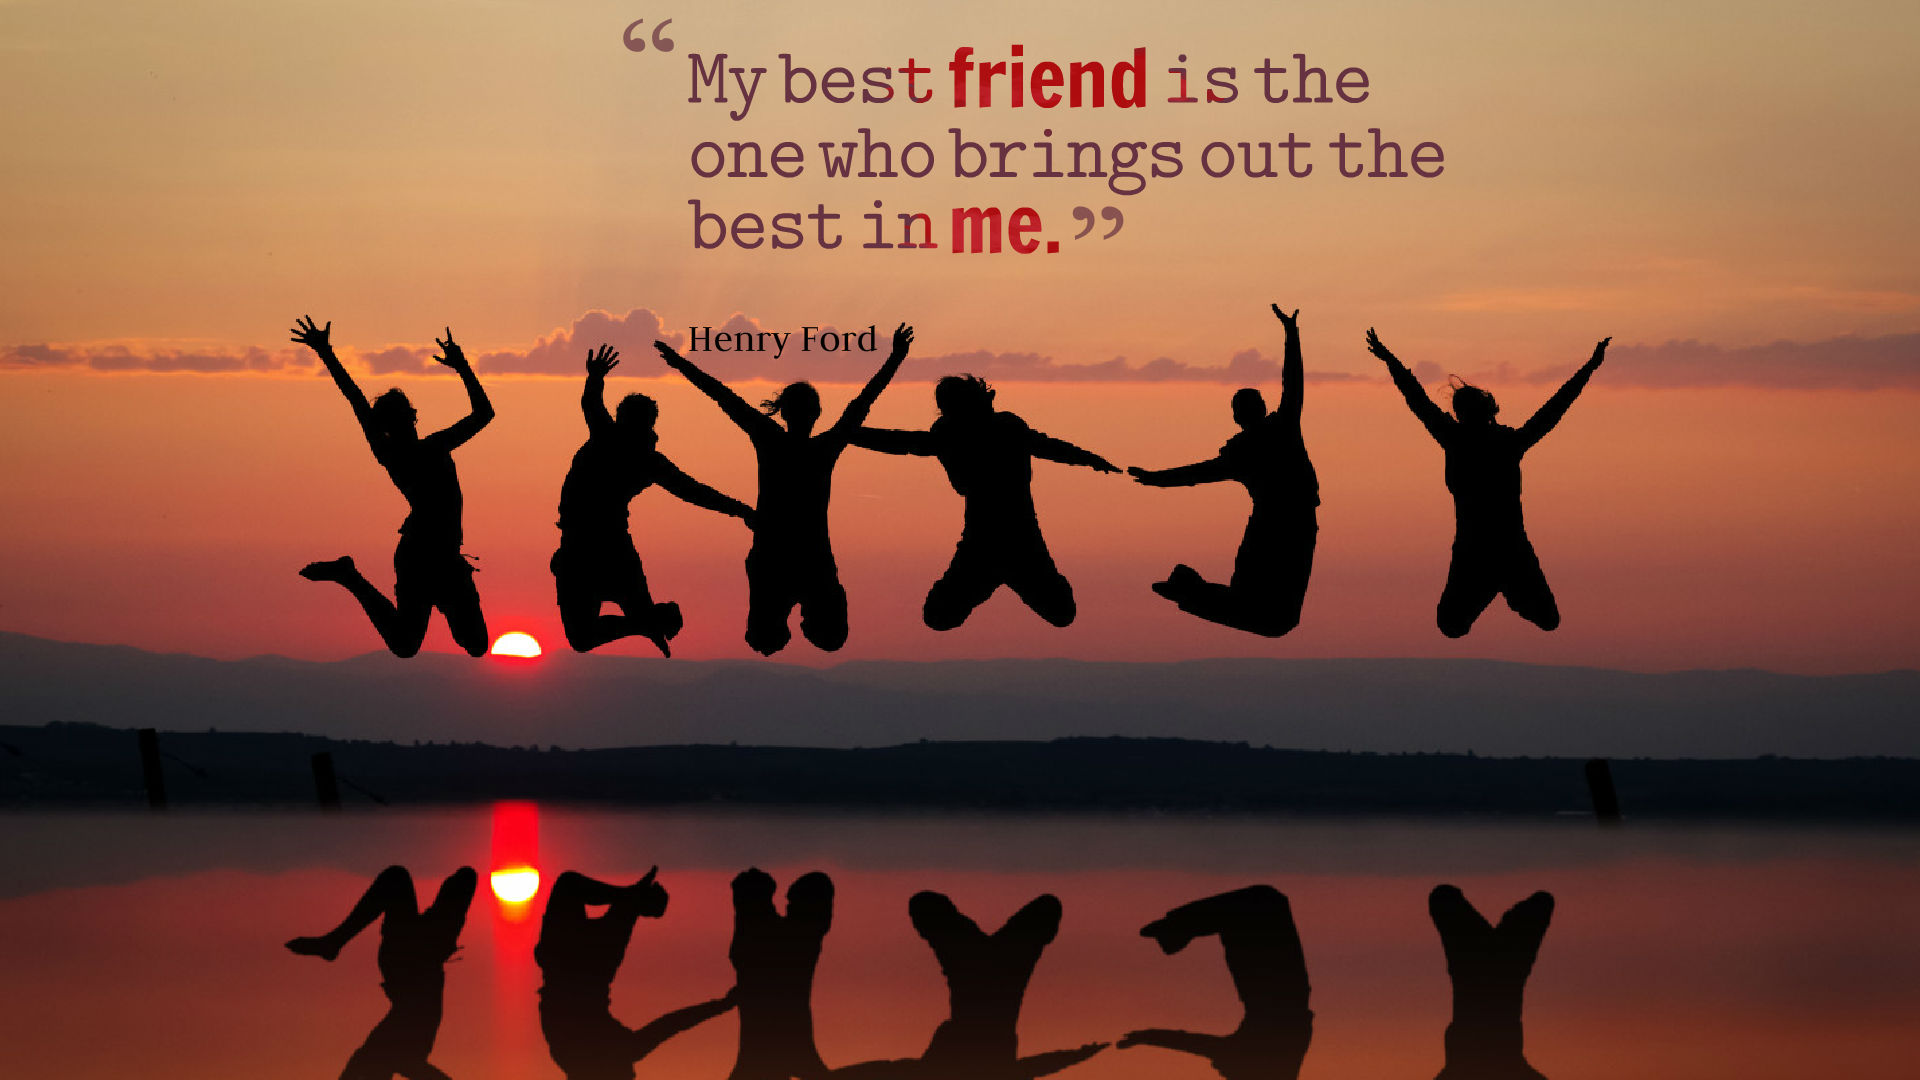 friendship wallpapers free download,people in nature,friendship,happy,fun,font